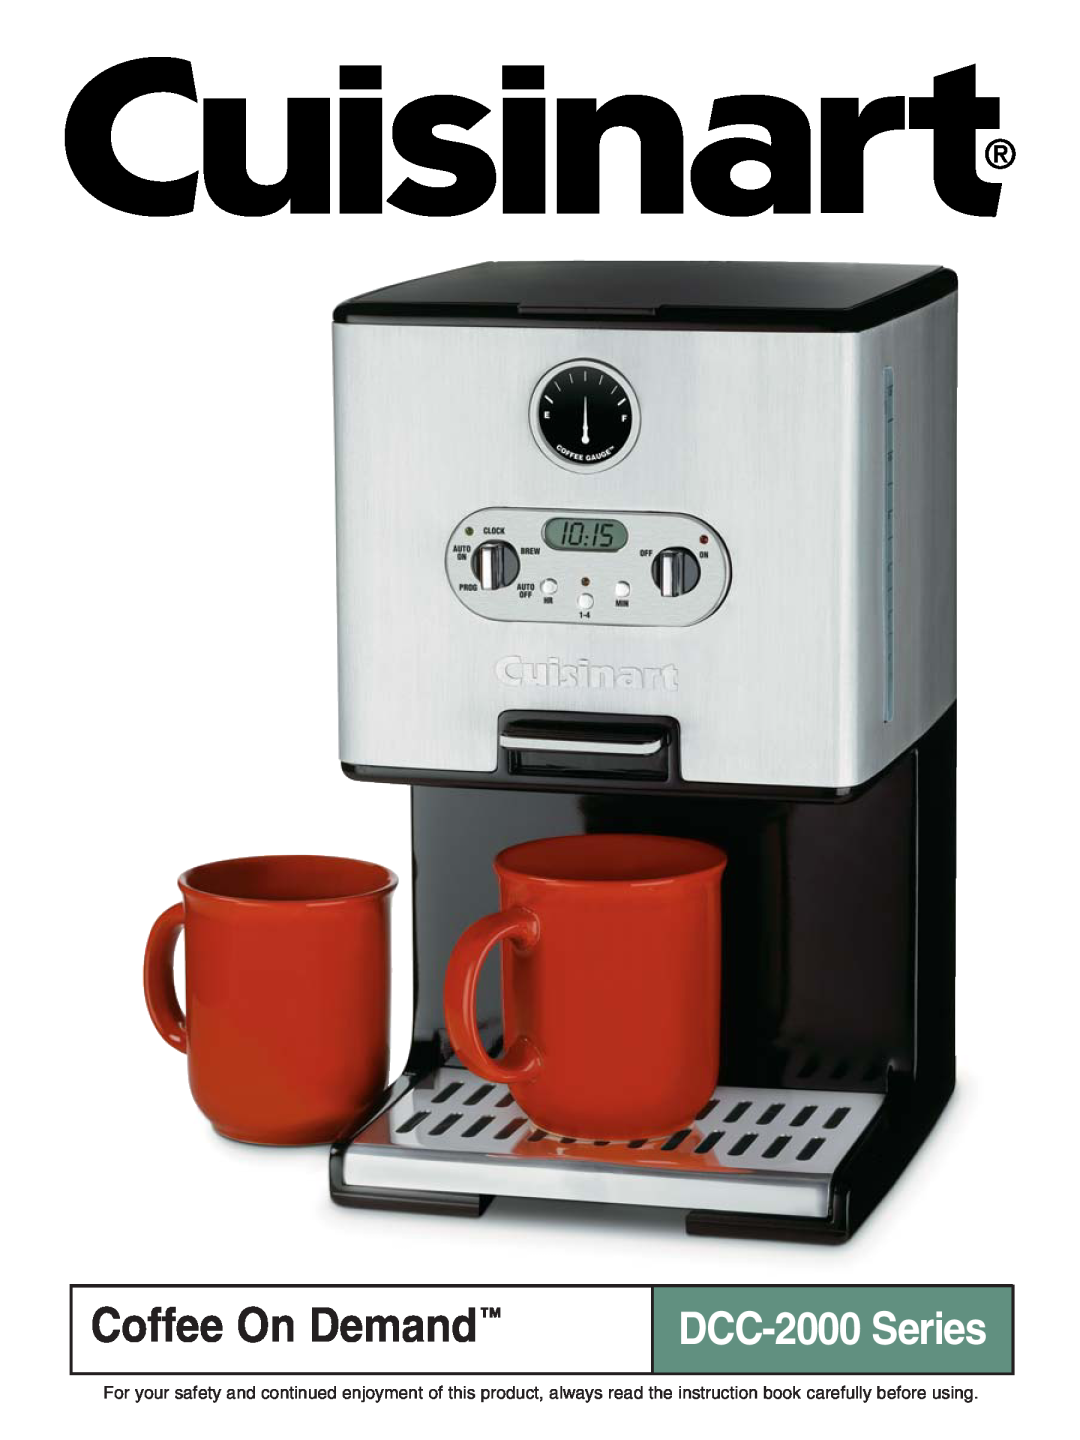 Cuisinart manual Coffee On Demand, DCC-2000 Series 